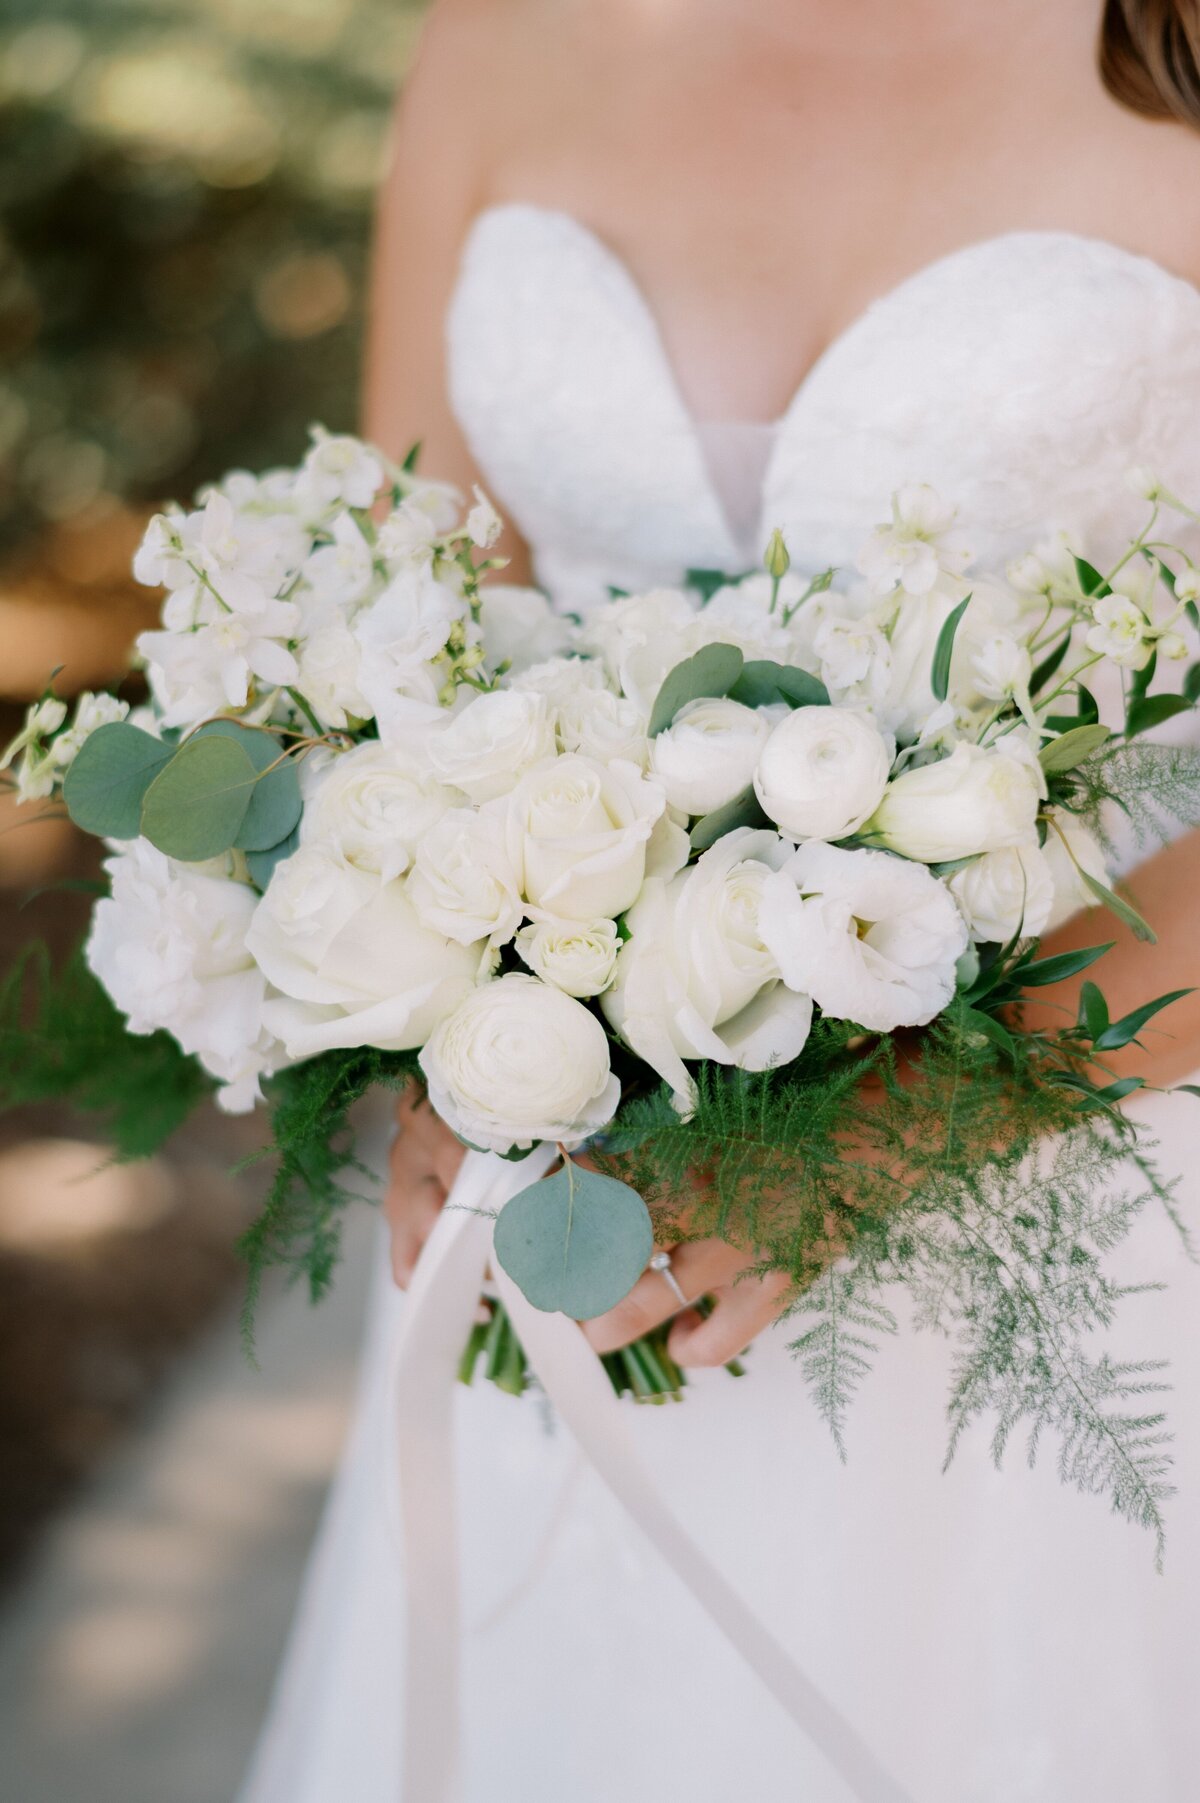 A closer look at the bride's white bouquet of florals.